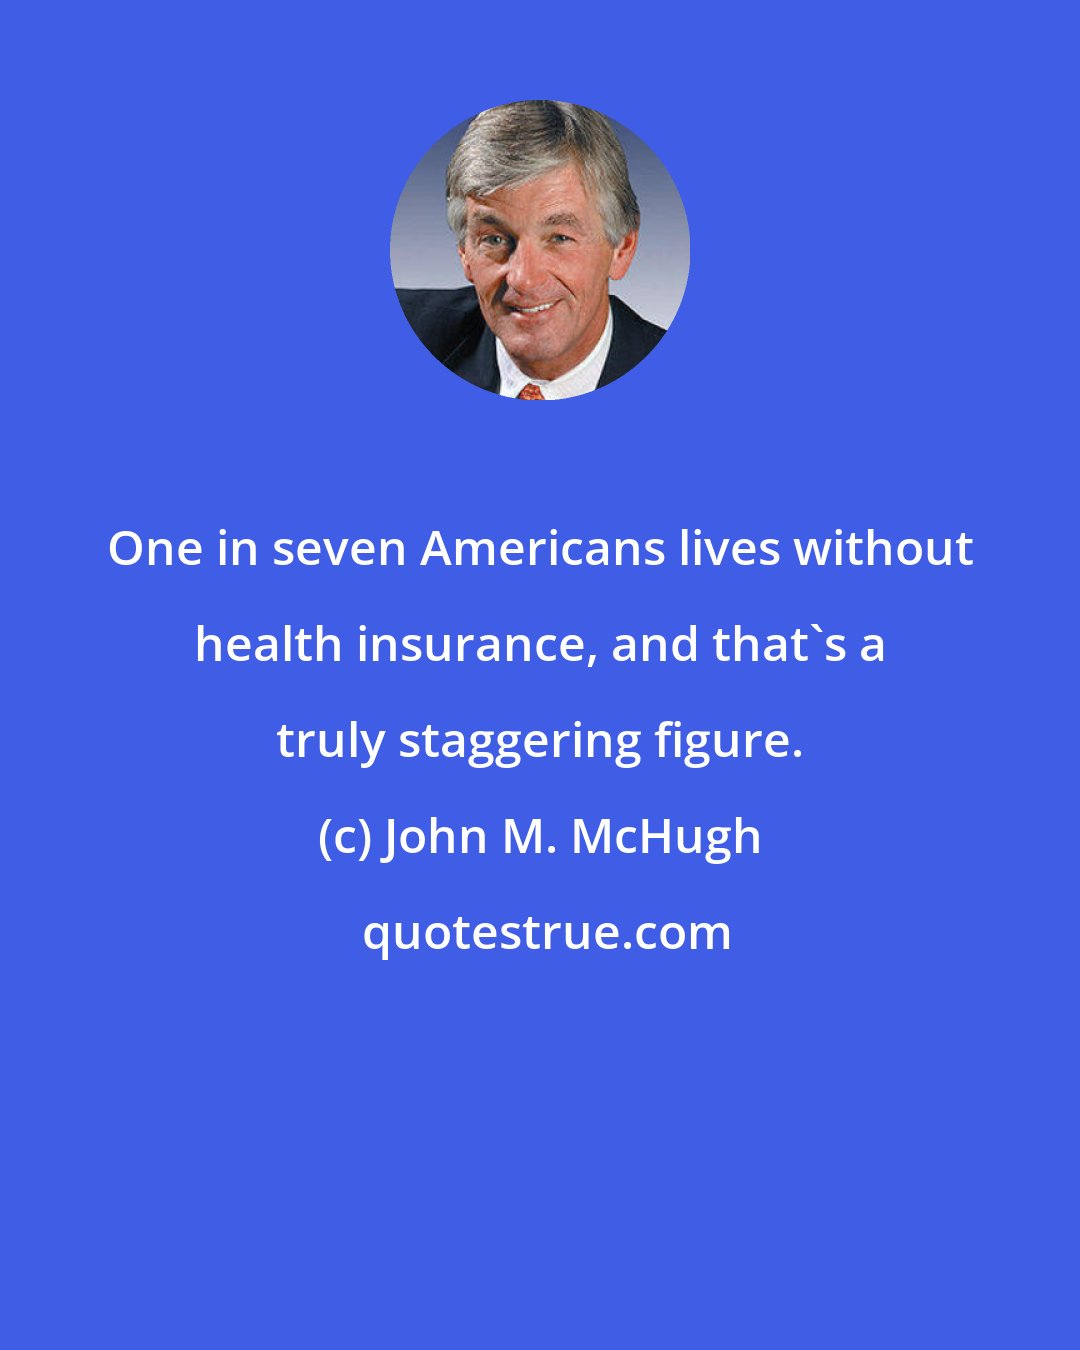 John M. McHugh: One in seven Americans lives without health insurance, and that's a truly staggering figure.